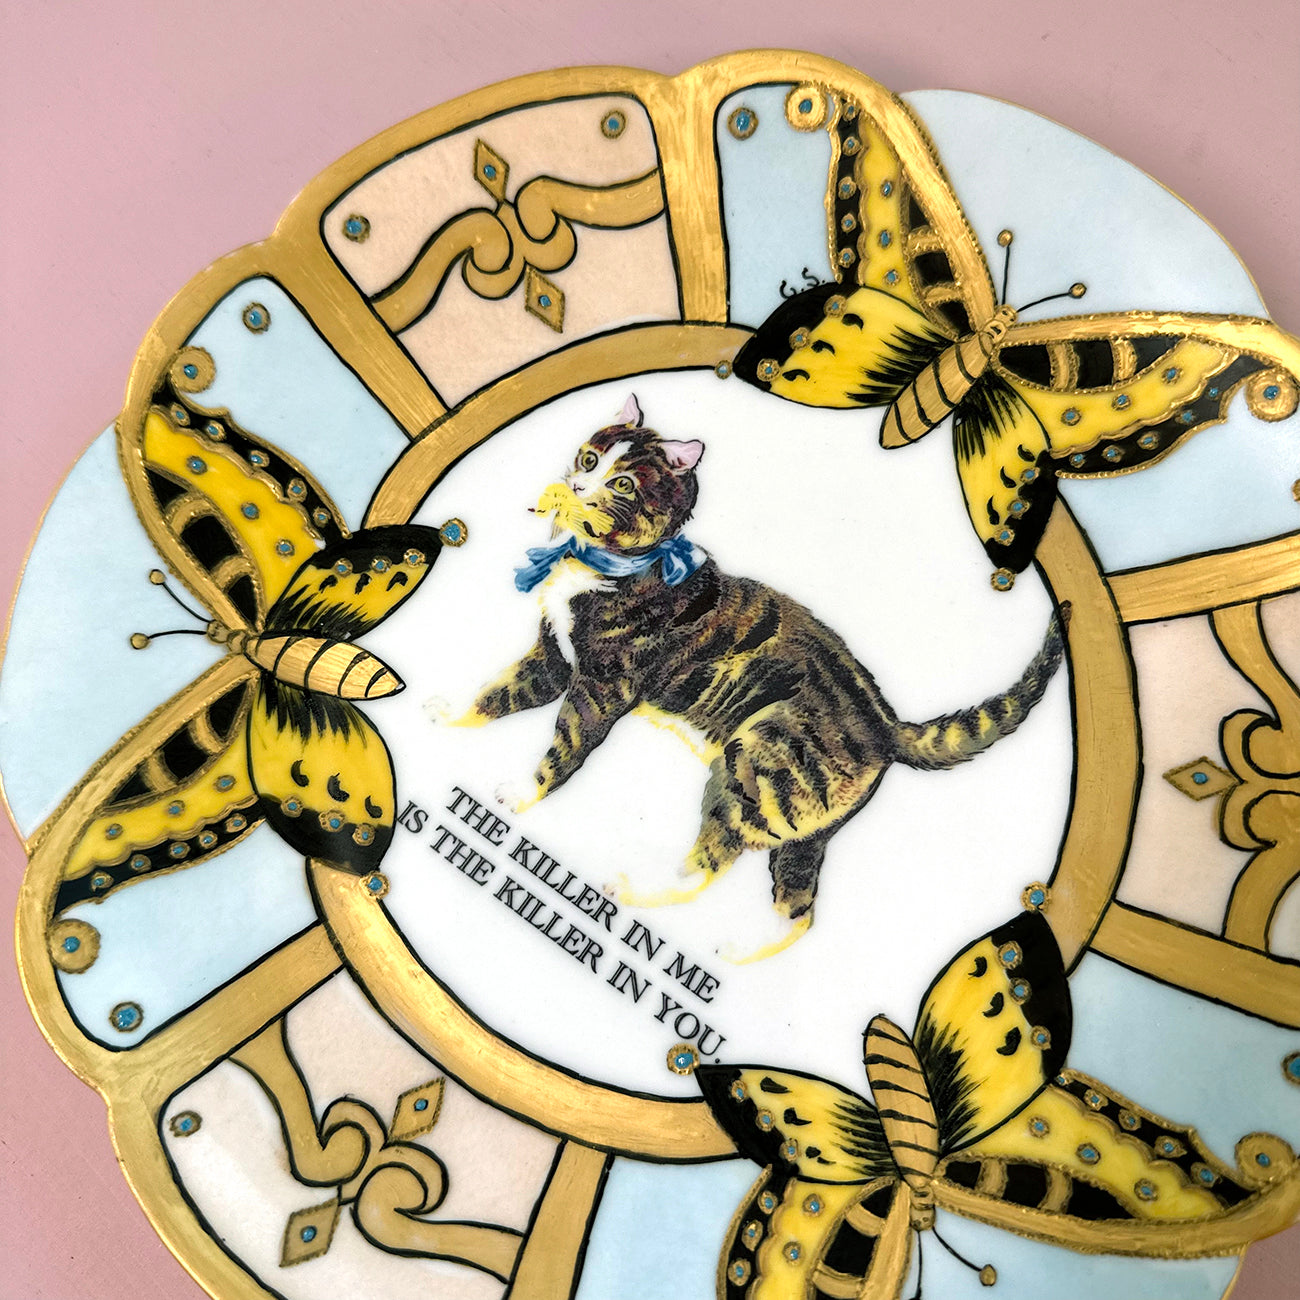 Antique Art Deco Plate - Cat plate - "The Killer in me is the killer in you."